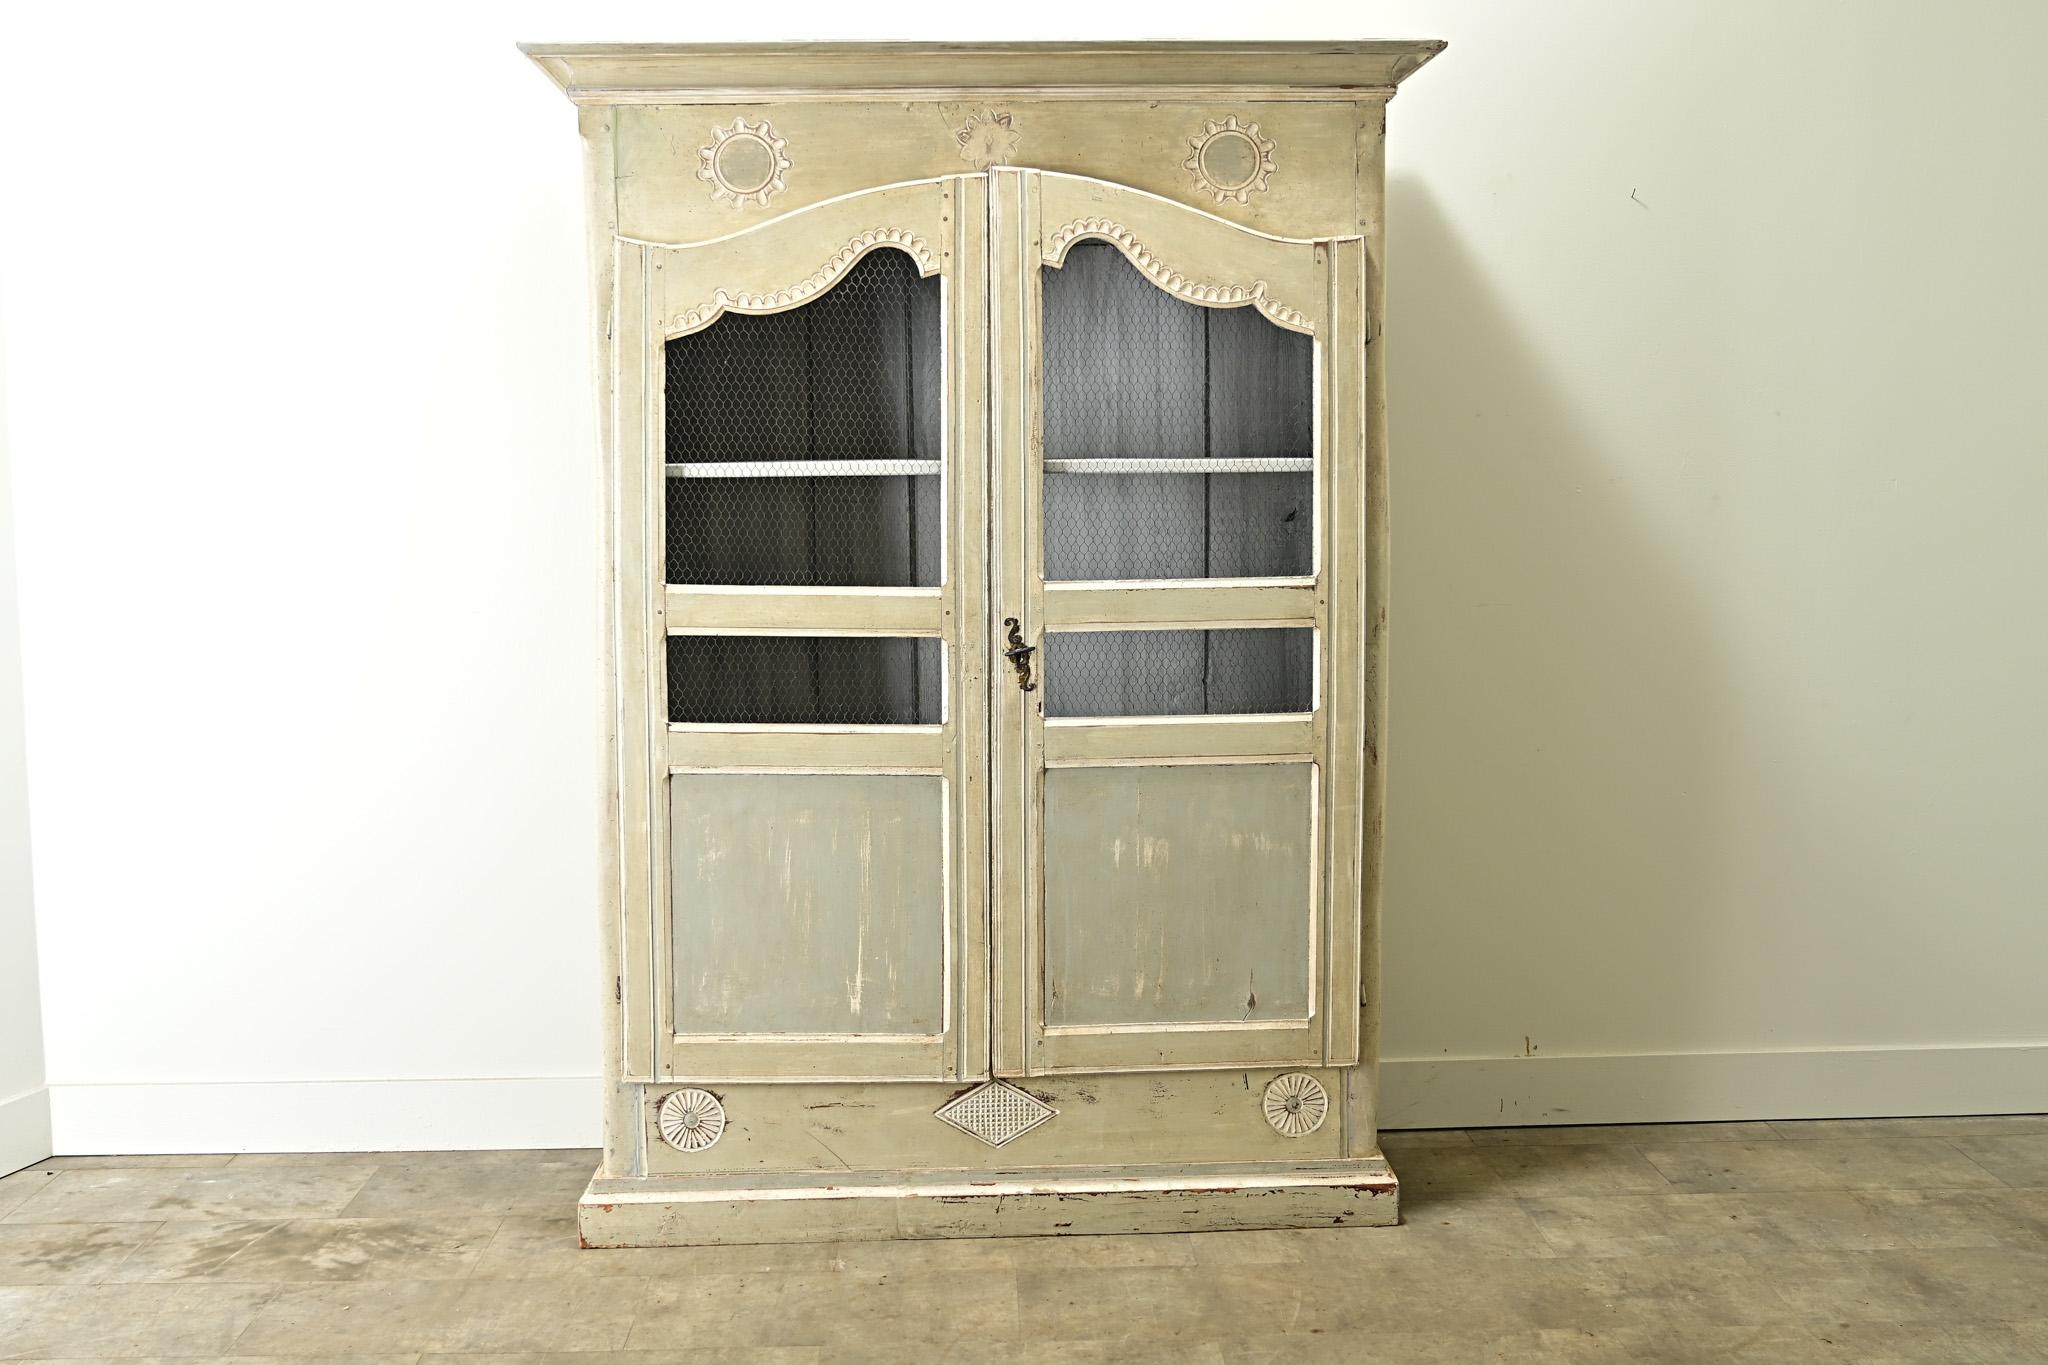 A painted and carved French armoire from the late 1700’s. The cabinet has its original paint finish that is worn in all the right places with whimsical and geographic carved designs. The pair of paneled doors are inset with a worn brass wire and